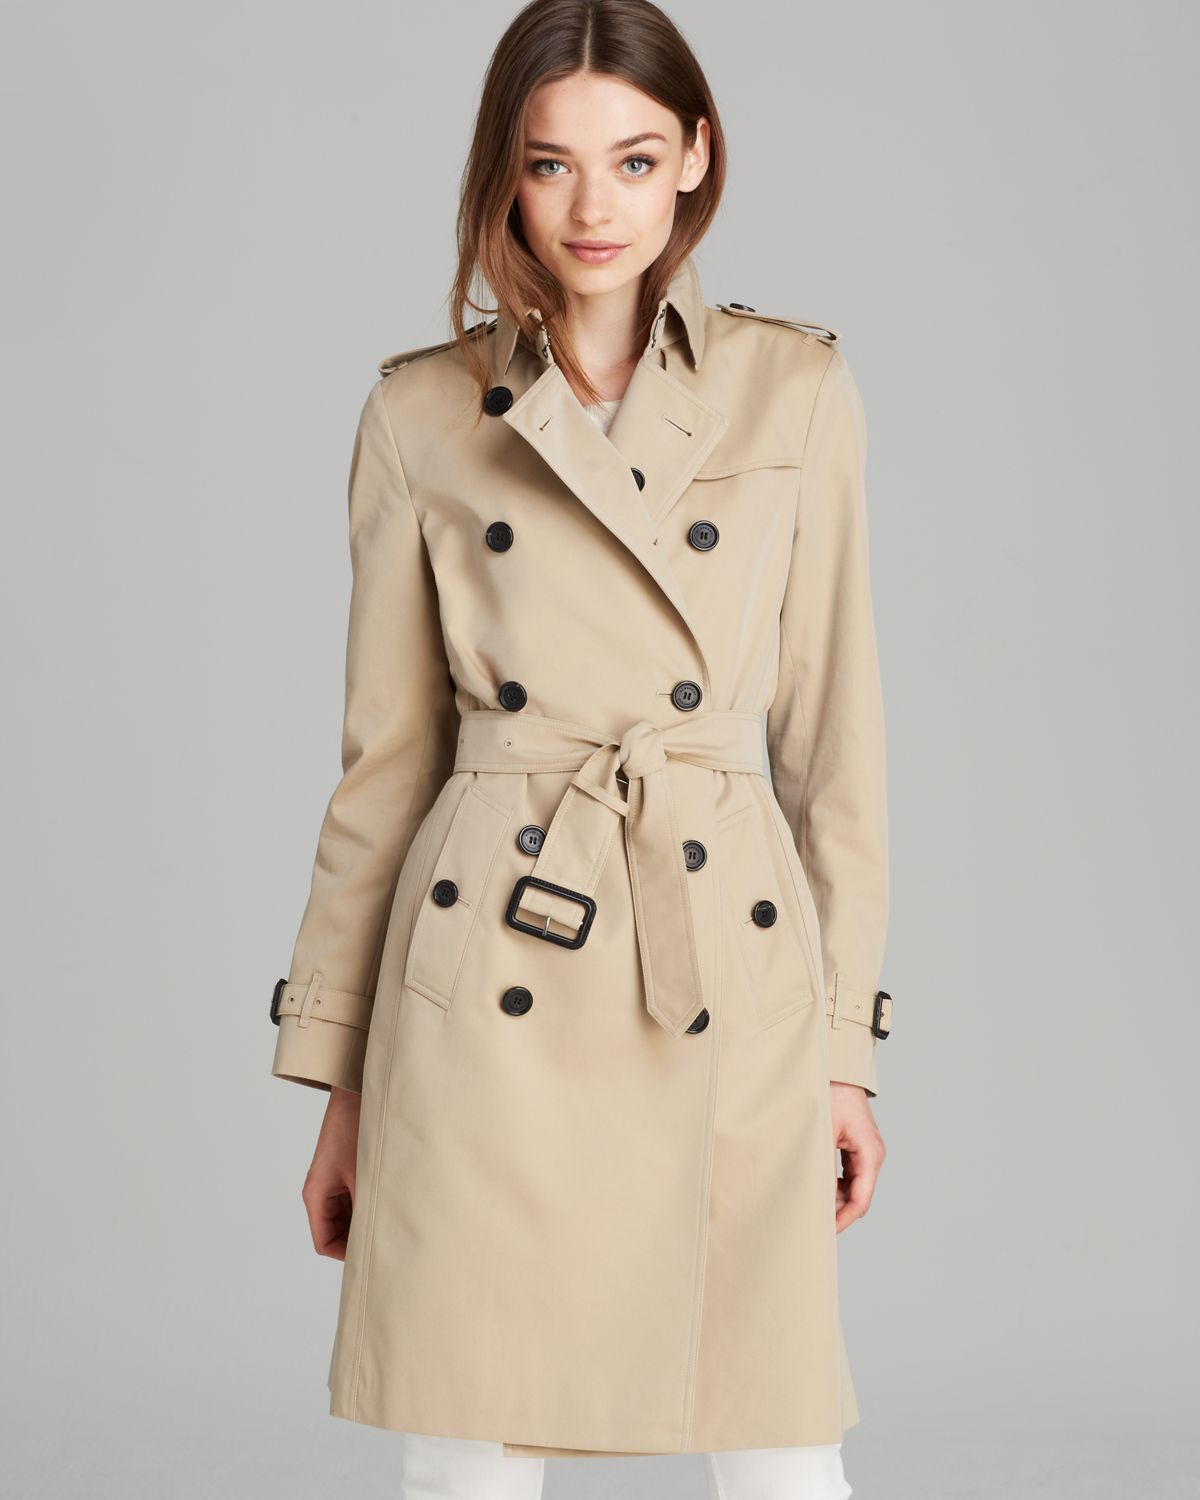 Burberry Trench Coat Sale Women | The 